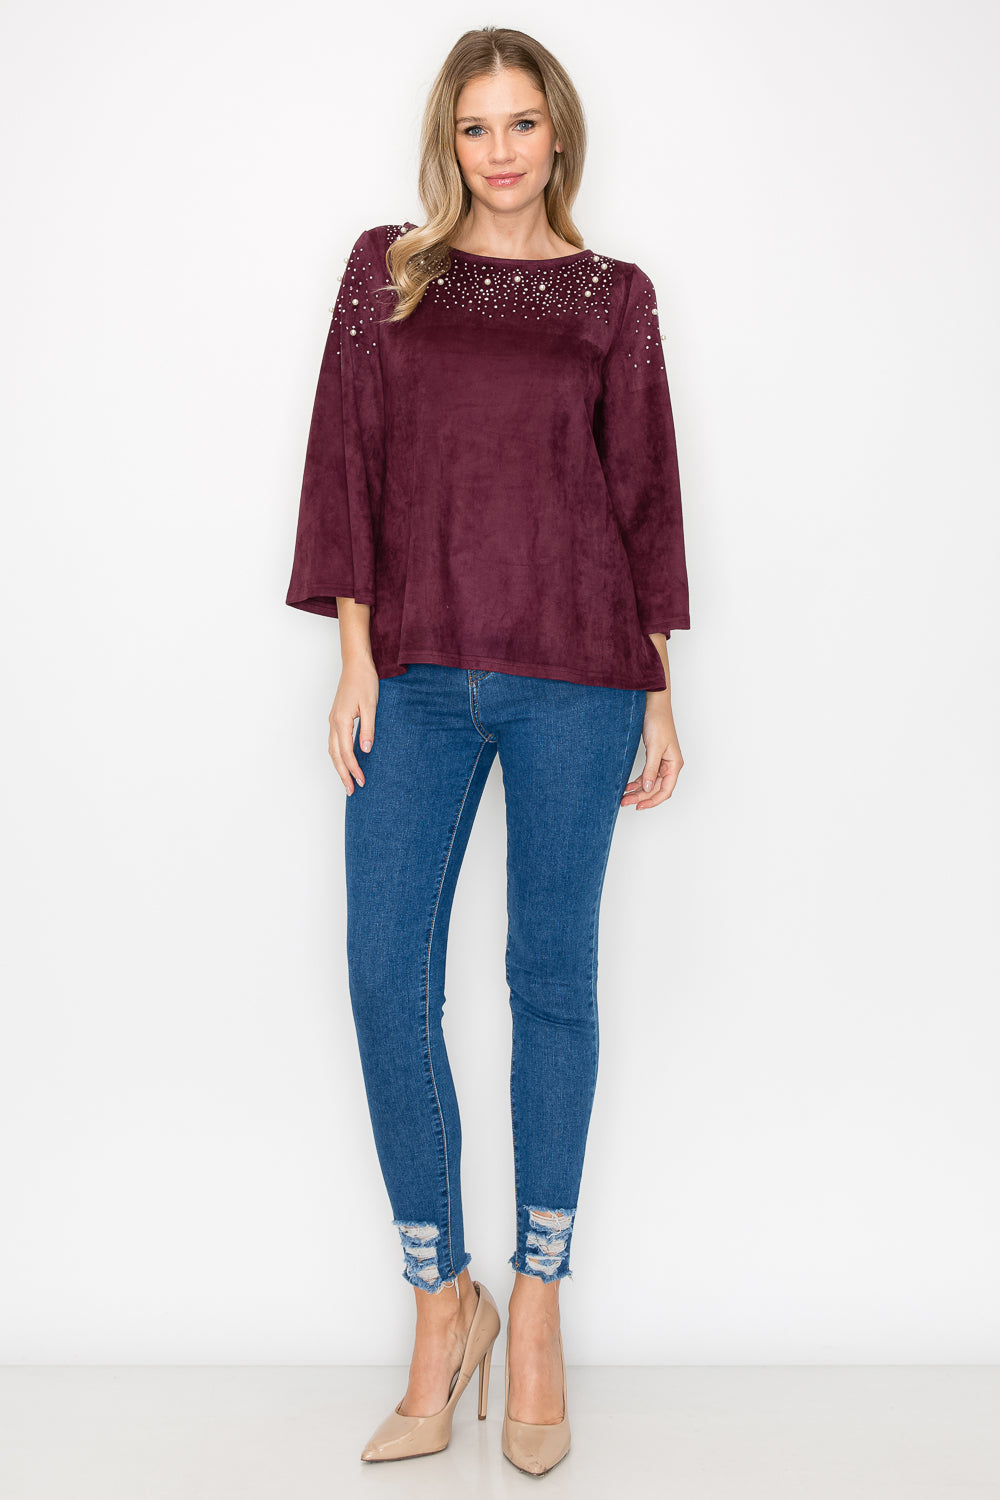 Annie Suede Top with Pearls